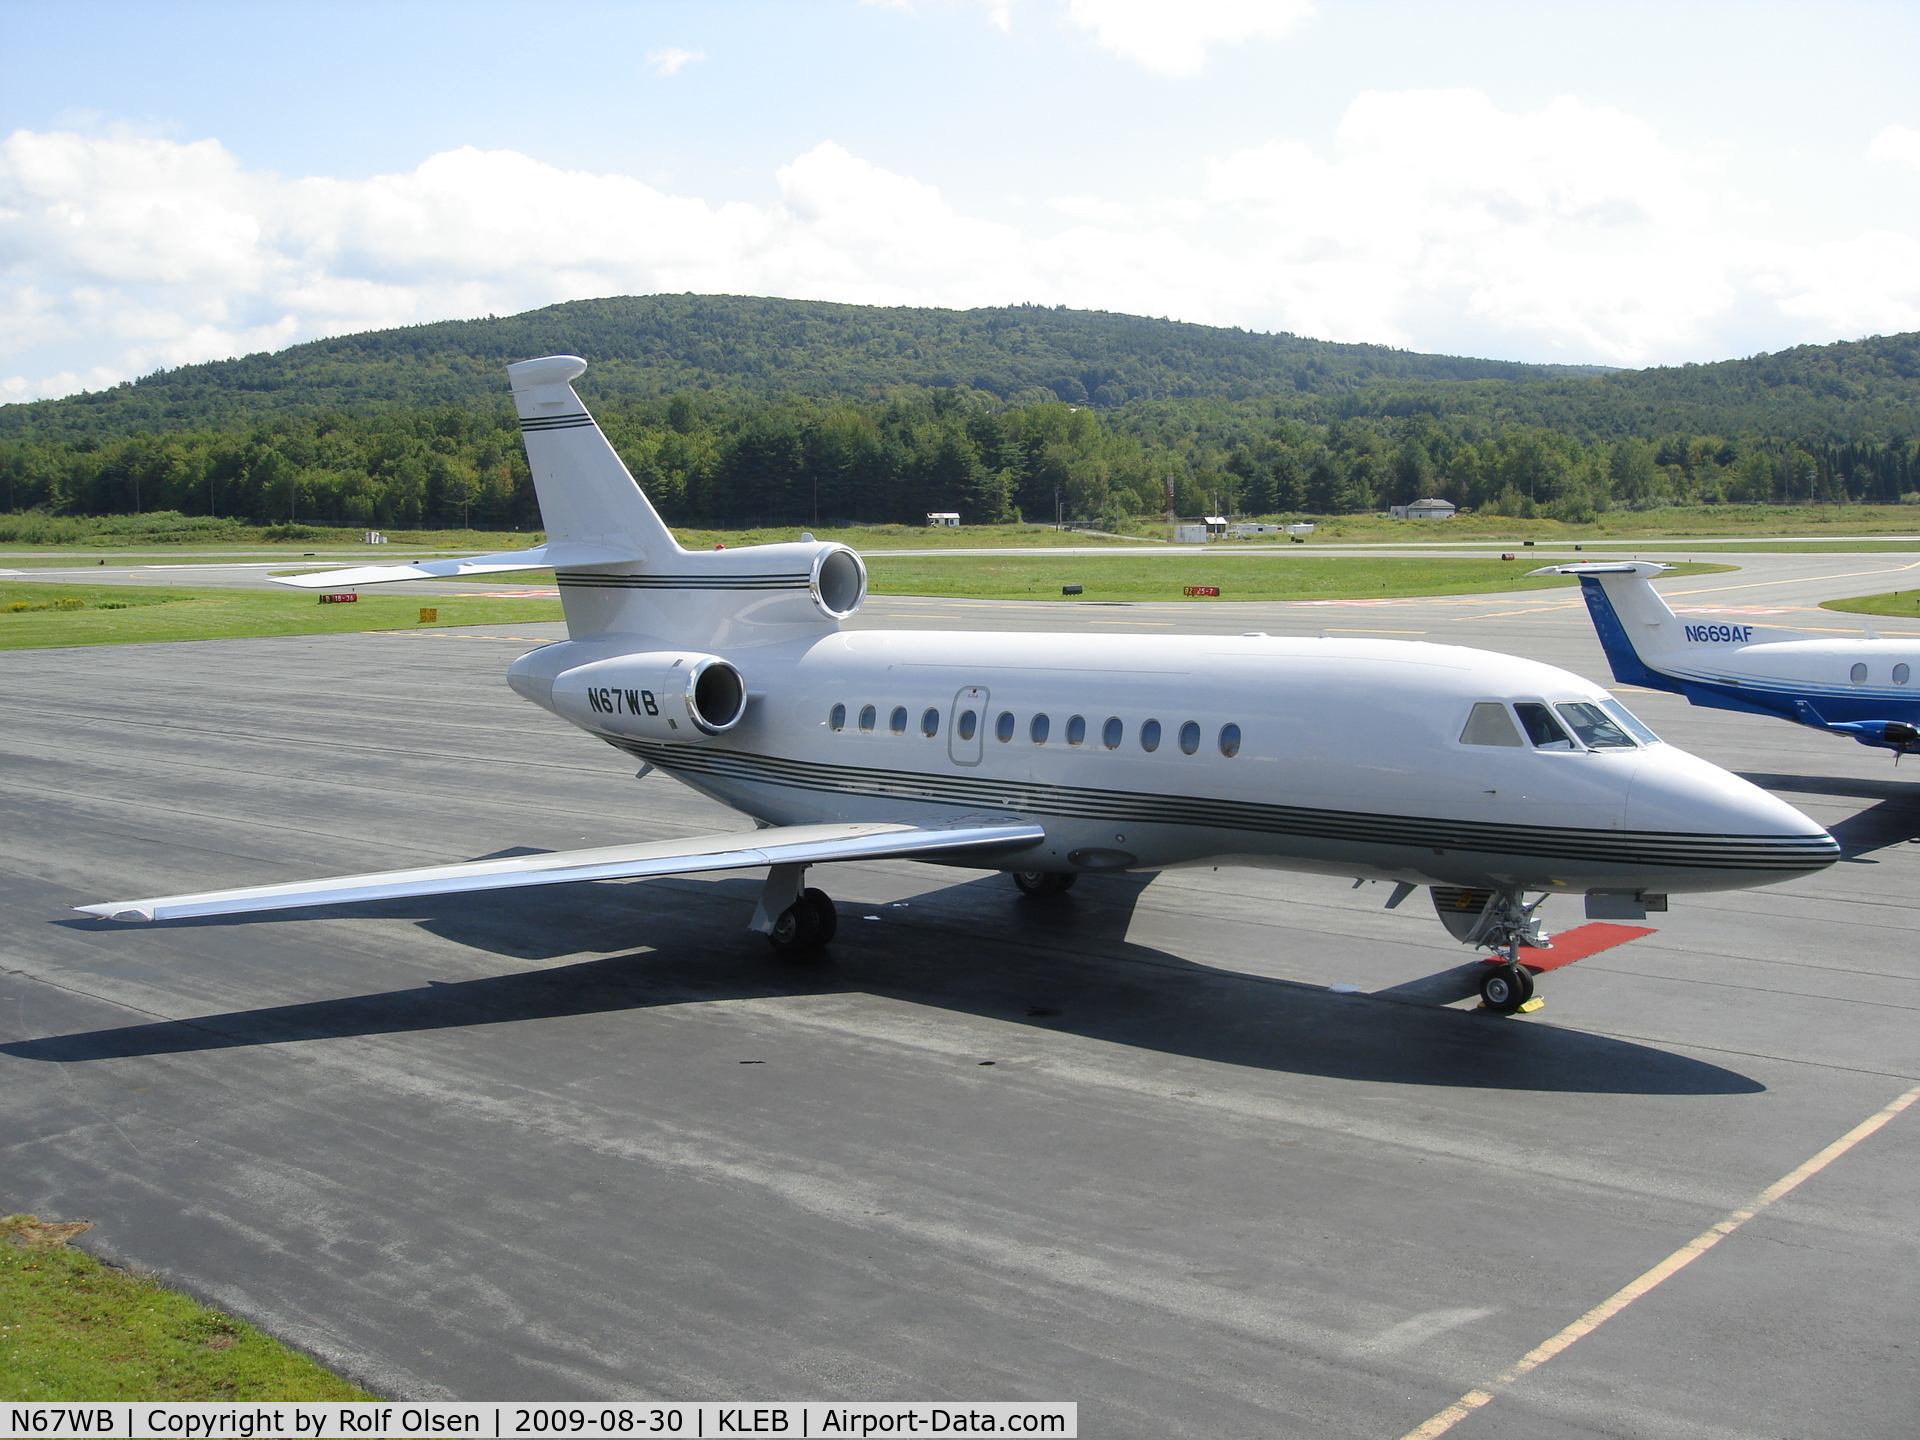 N67WB, 1997 Dassault Falcon 900EX C/N 16, N67WB at Lebanon Airport in New Hampshire on a beautiful late summer day.